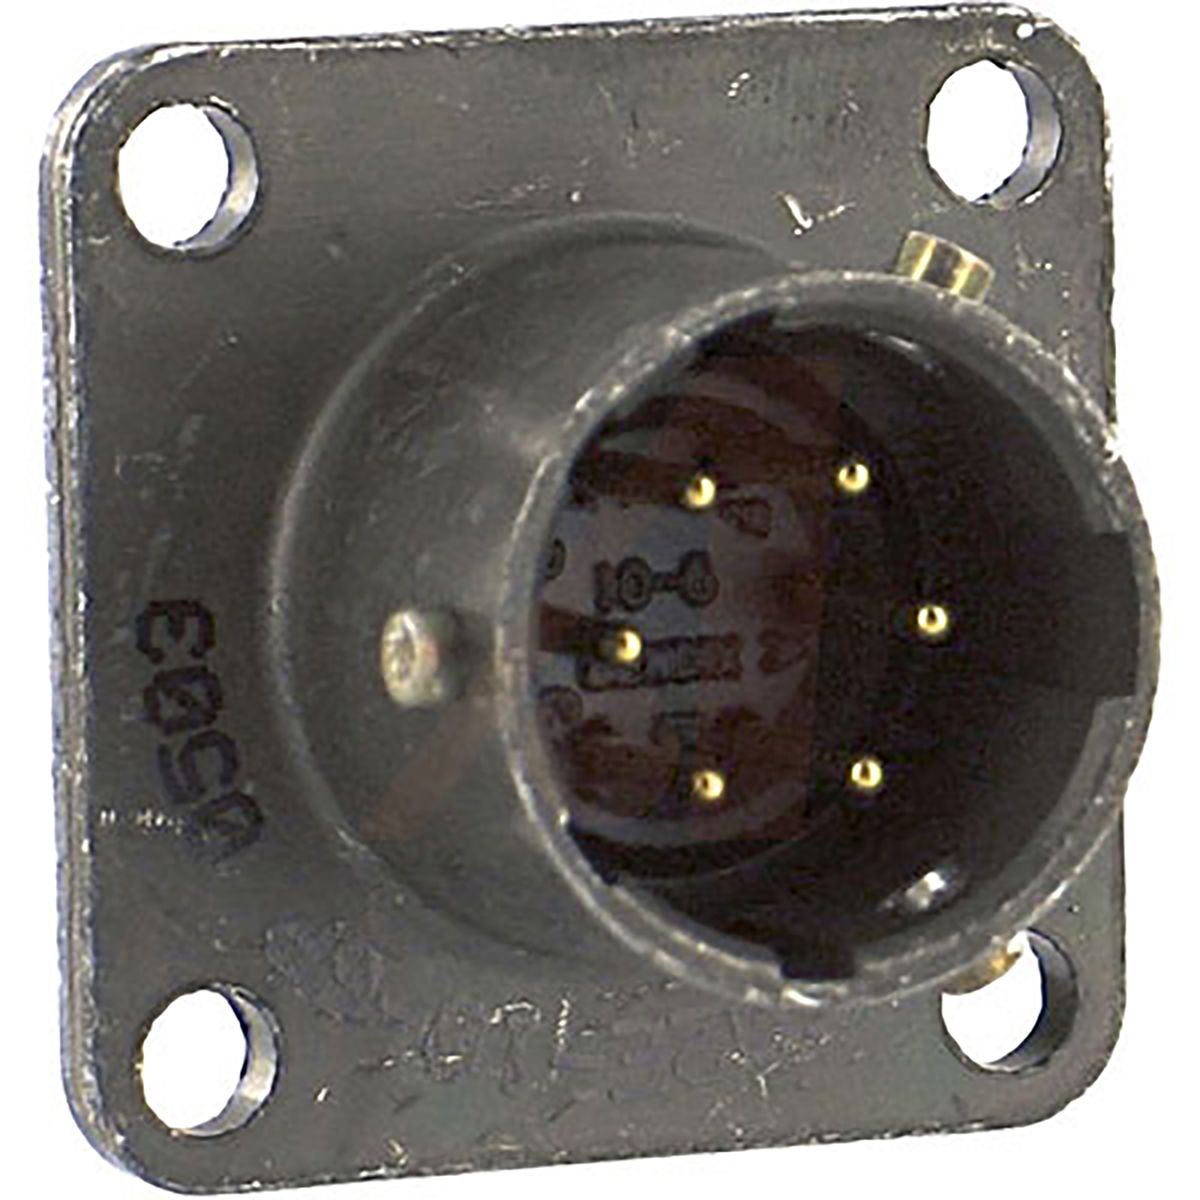 Amphenol Socapex, PT 6 Way Panel Mount MIL Spec Circular Connector Receptacle, Pin Contacts,Shell Size 10, Bayonet,